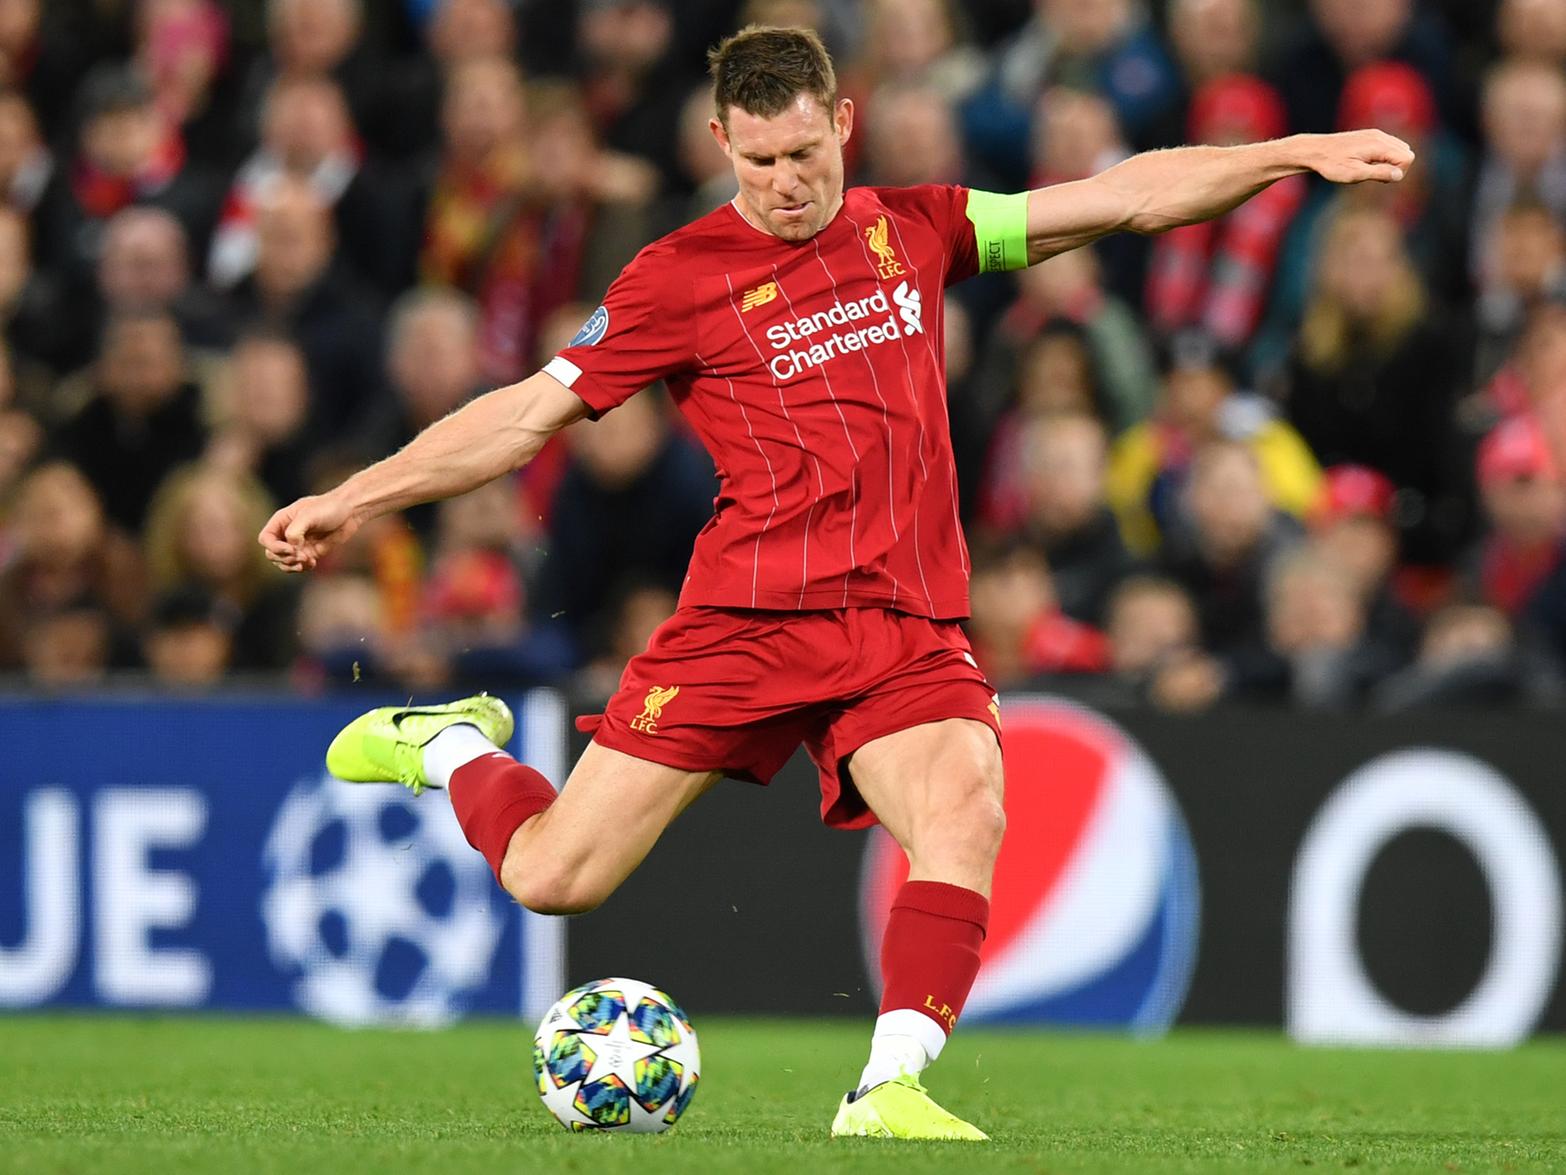 Former Leeds United ace James Milner has revealed he's fully focused on securing a new contract with Liverpool, which will come as a blow to Whites fans hoping to see him back at Elland Road next season. (The Athletic)